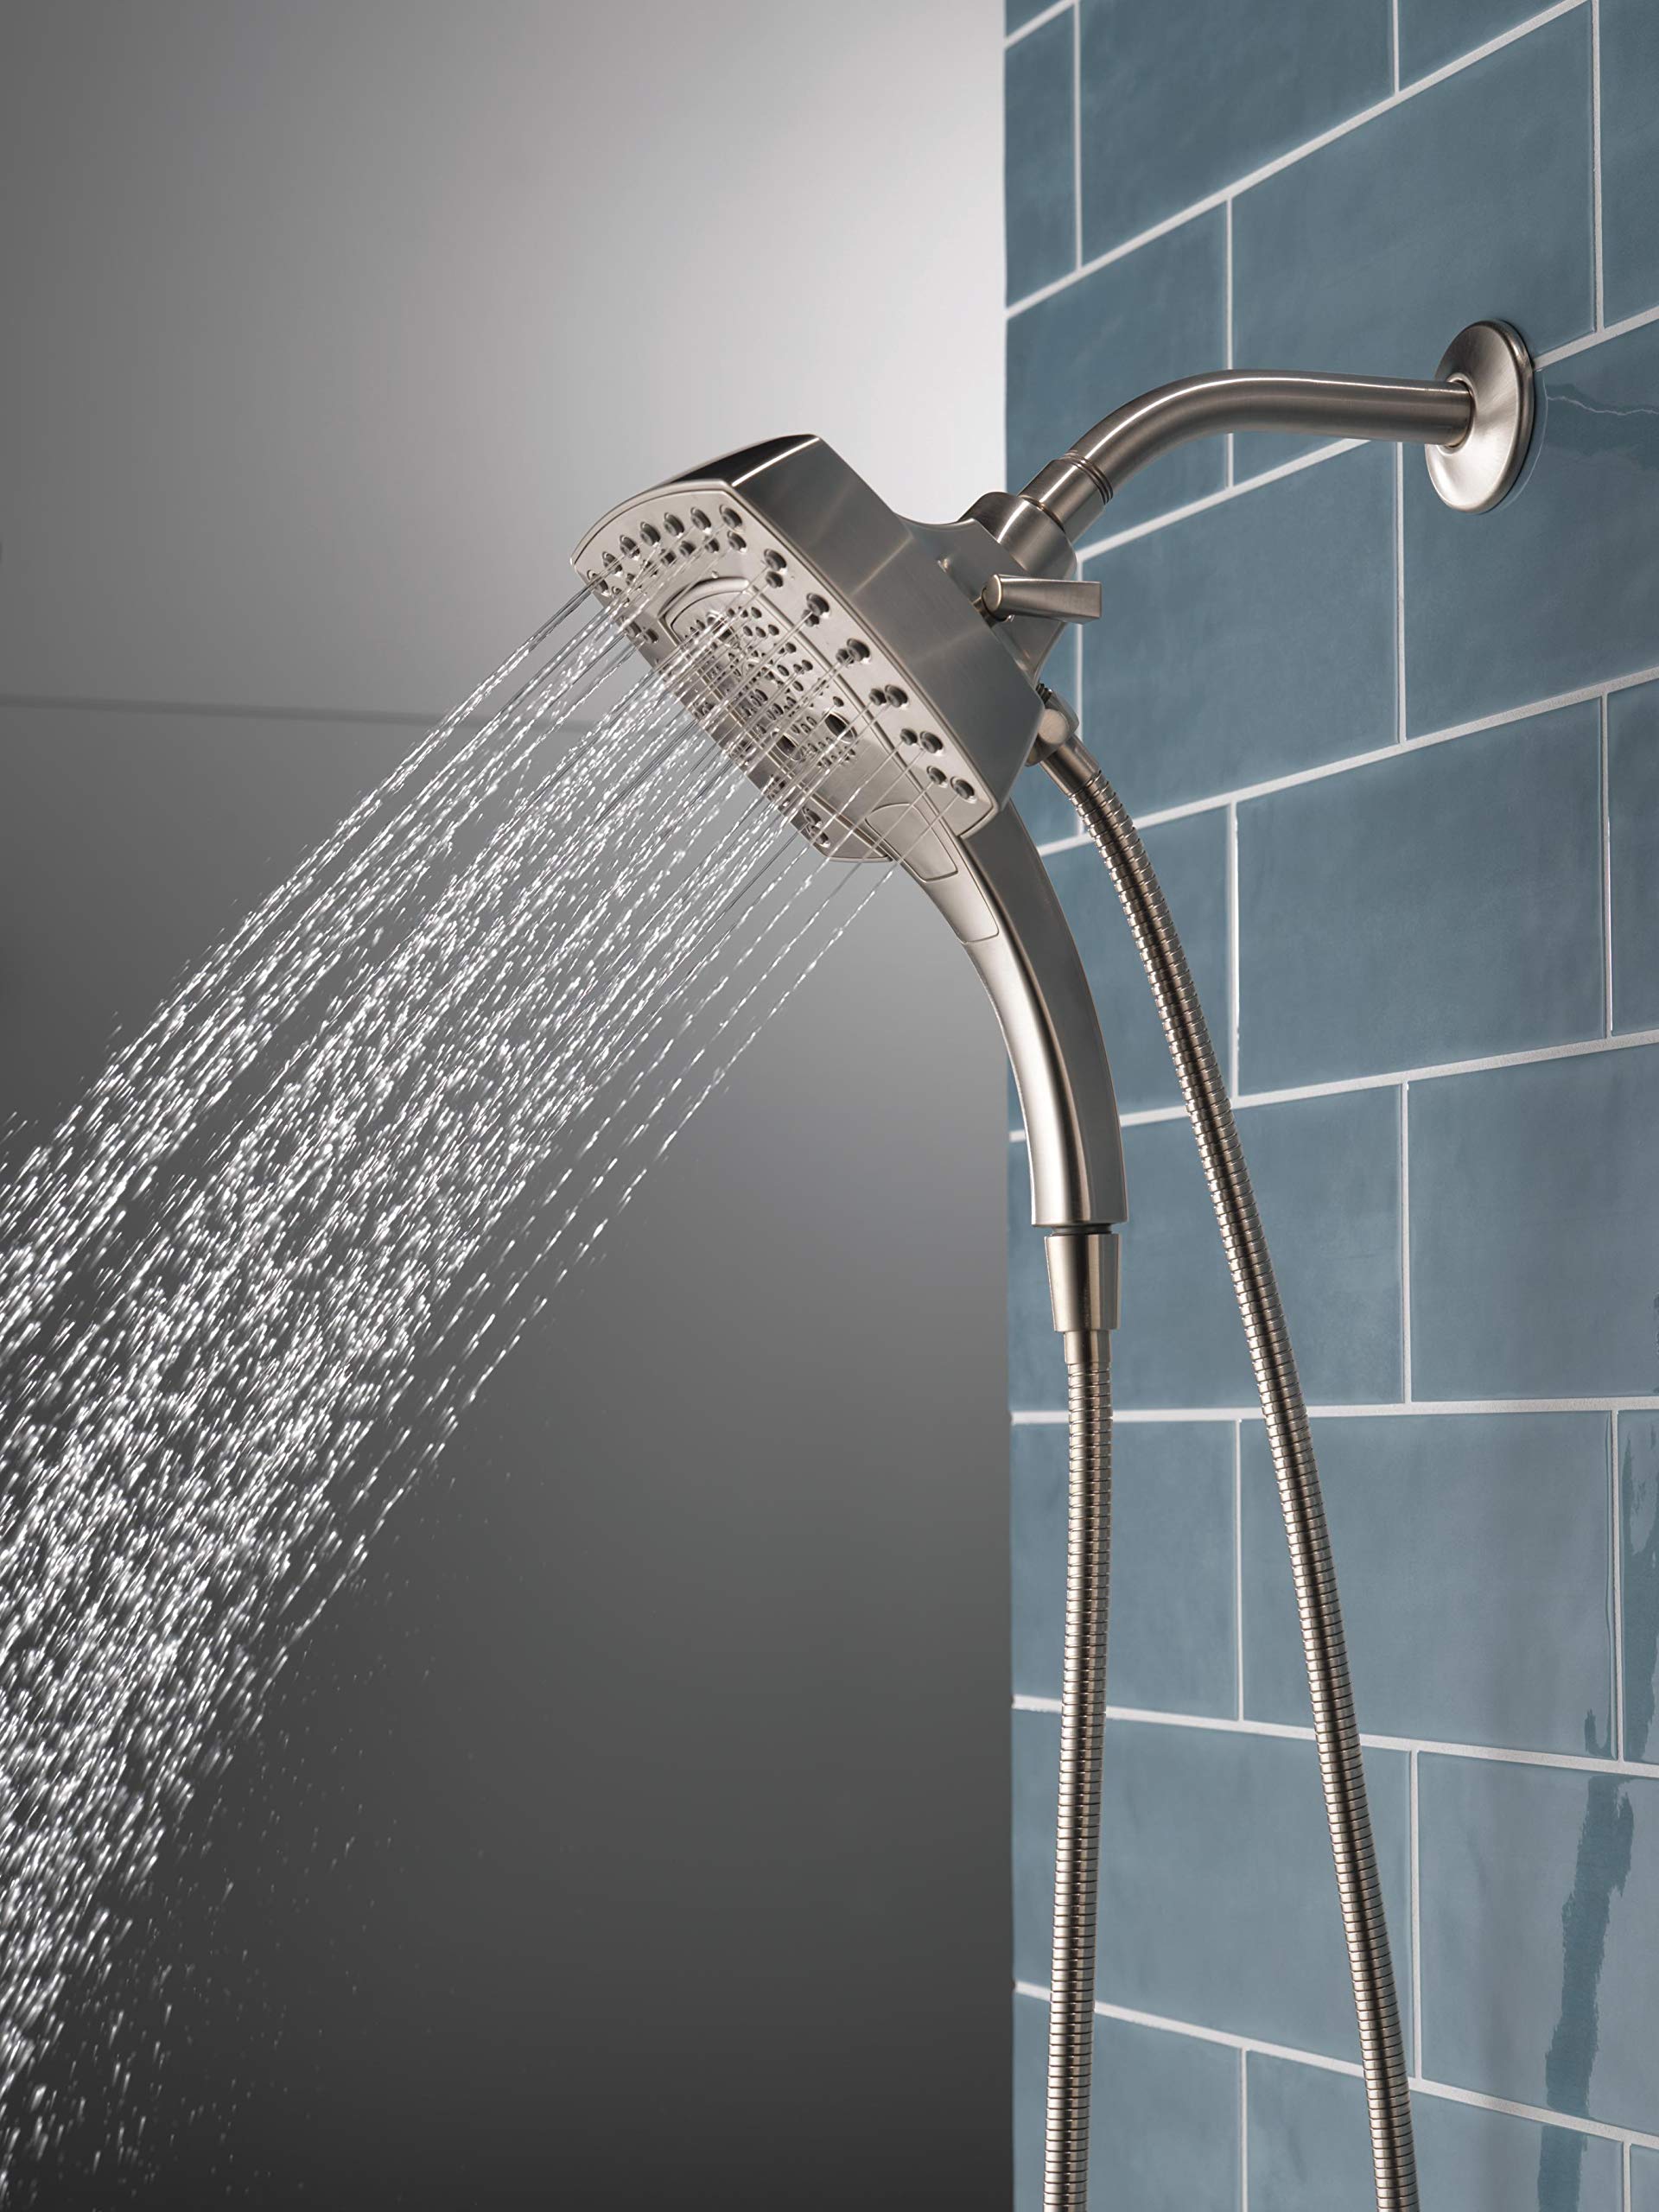 Delta Faucet 5-Spray In2ition 2-in-1 Dual Hand Held Shower Head with Hose, Magnetic Docking Handheld Shower Head, Stainless 58474-SS25, 2.5 GPM Water Flow